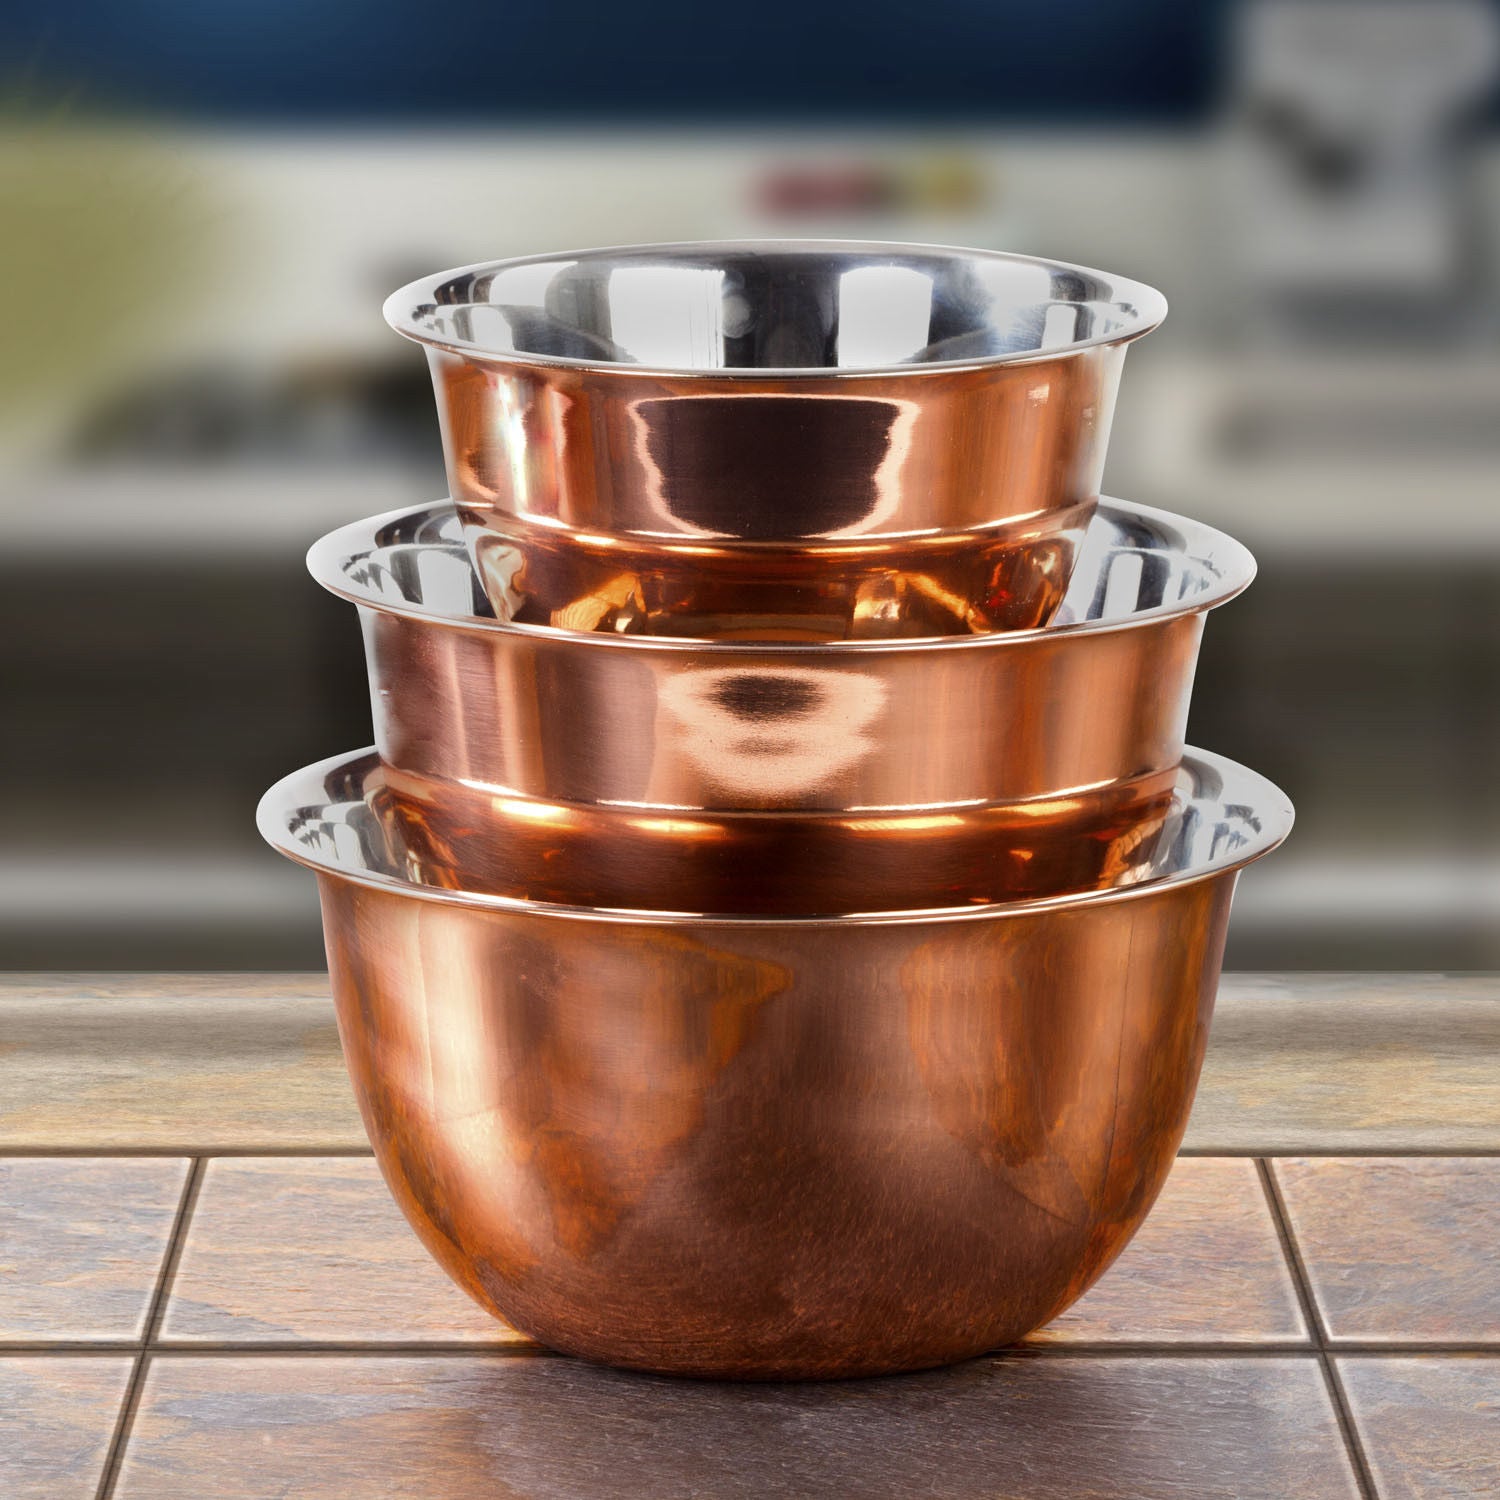 High Quality Stainless Steel Copper Mixing Bowl - 3 Piece Nesting